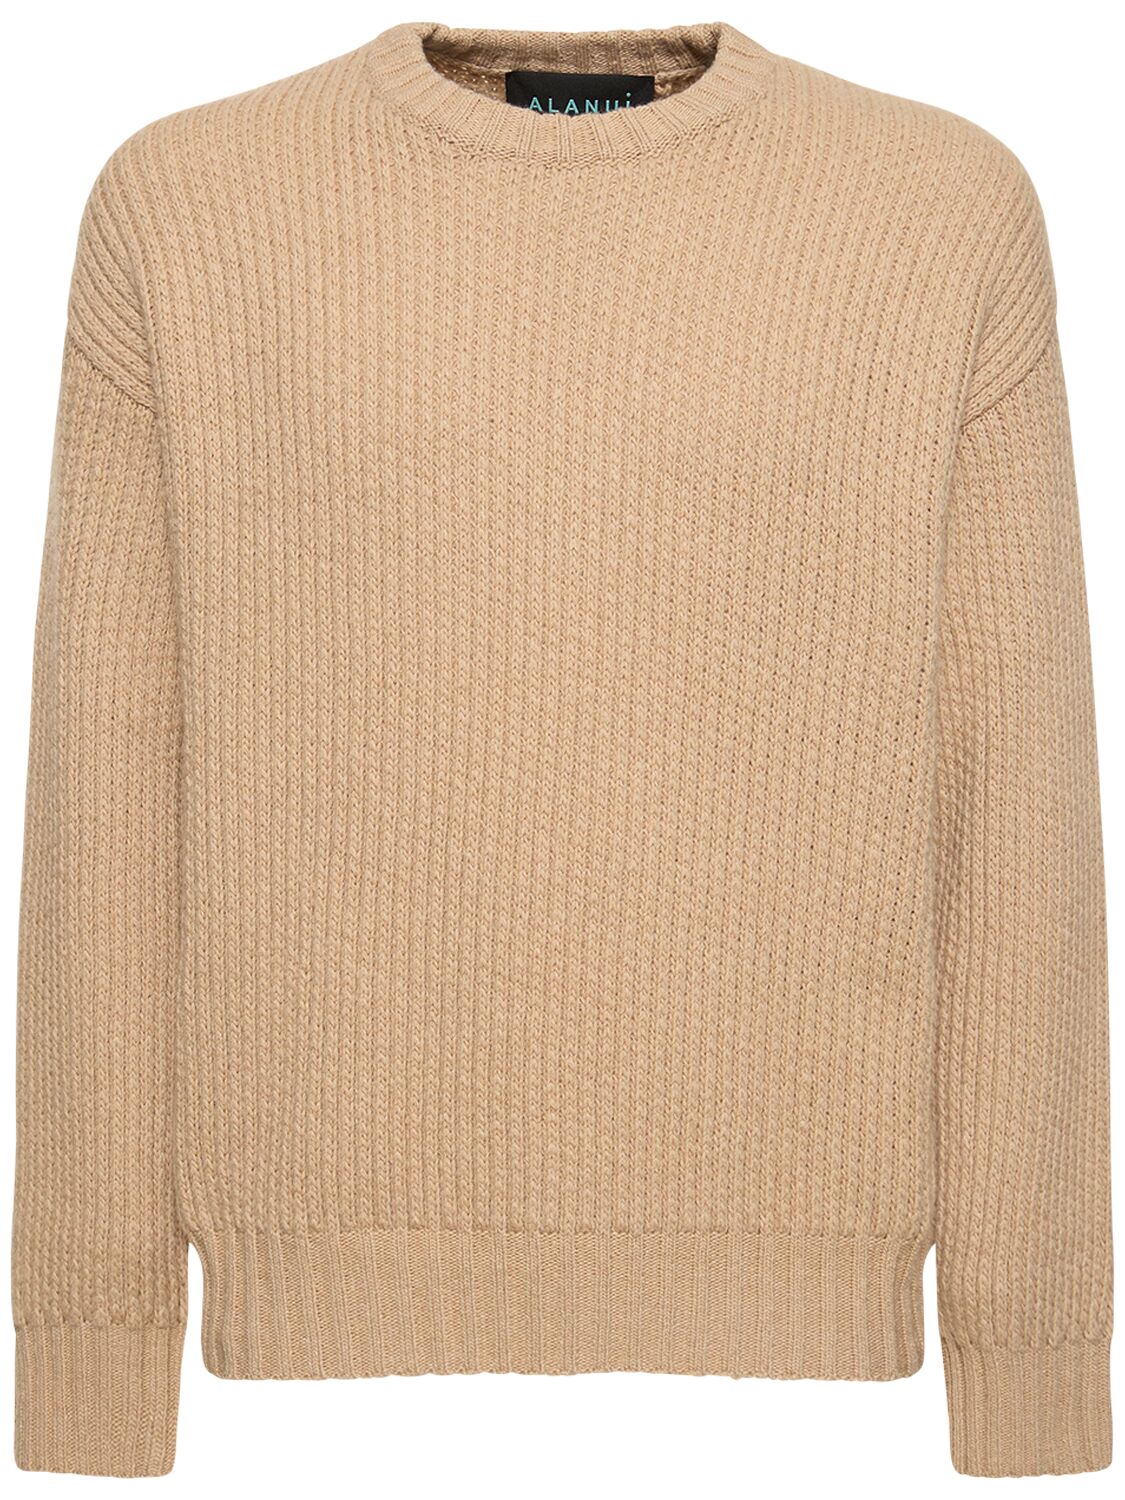 Image of Cashmere & Cotton Knit Sweater